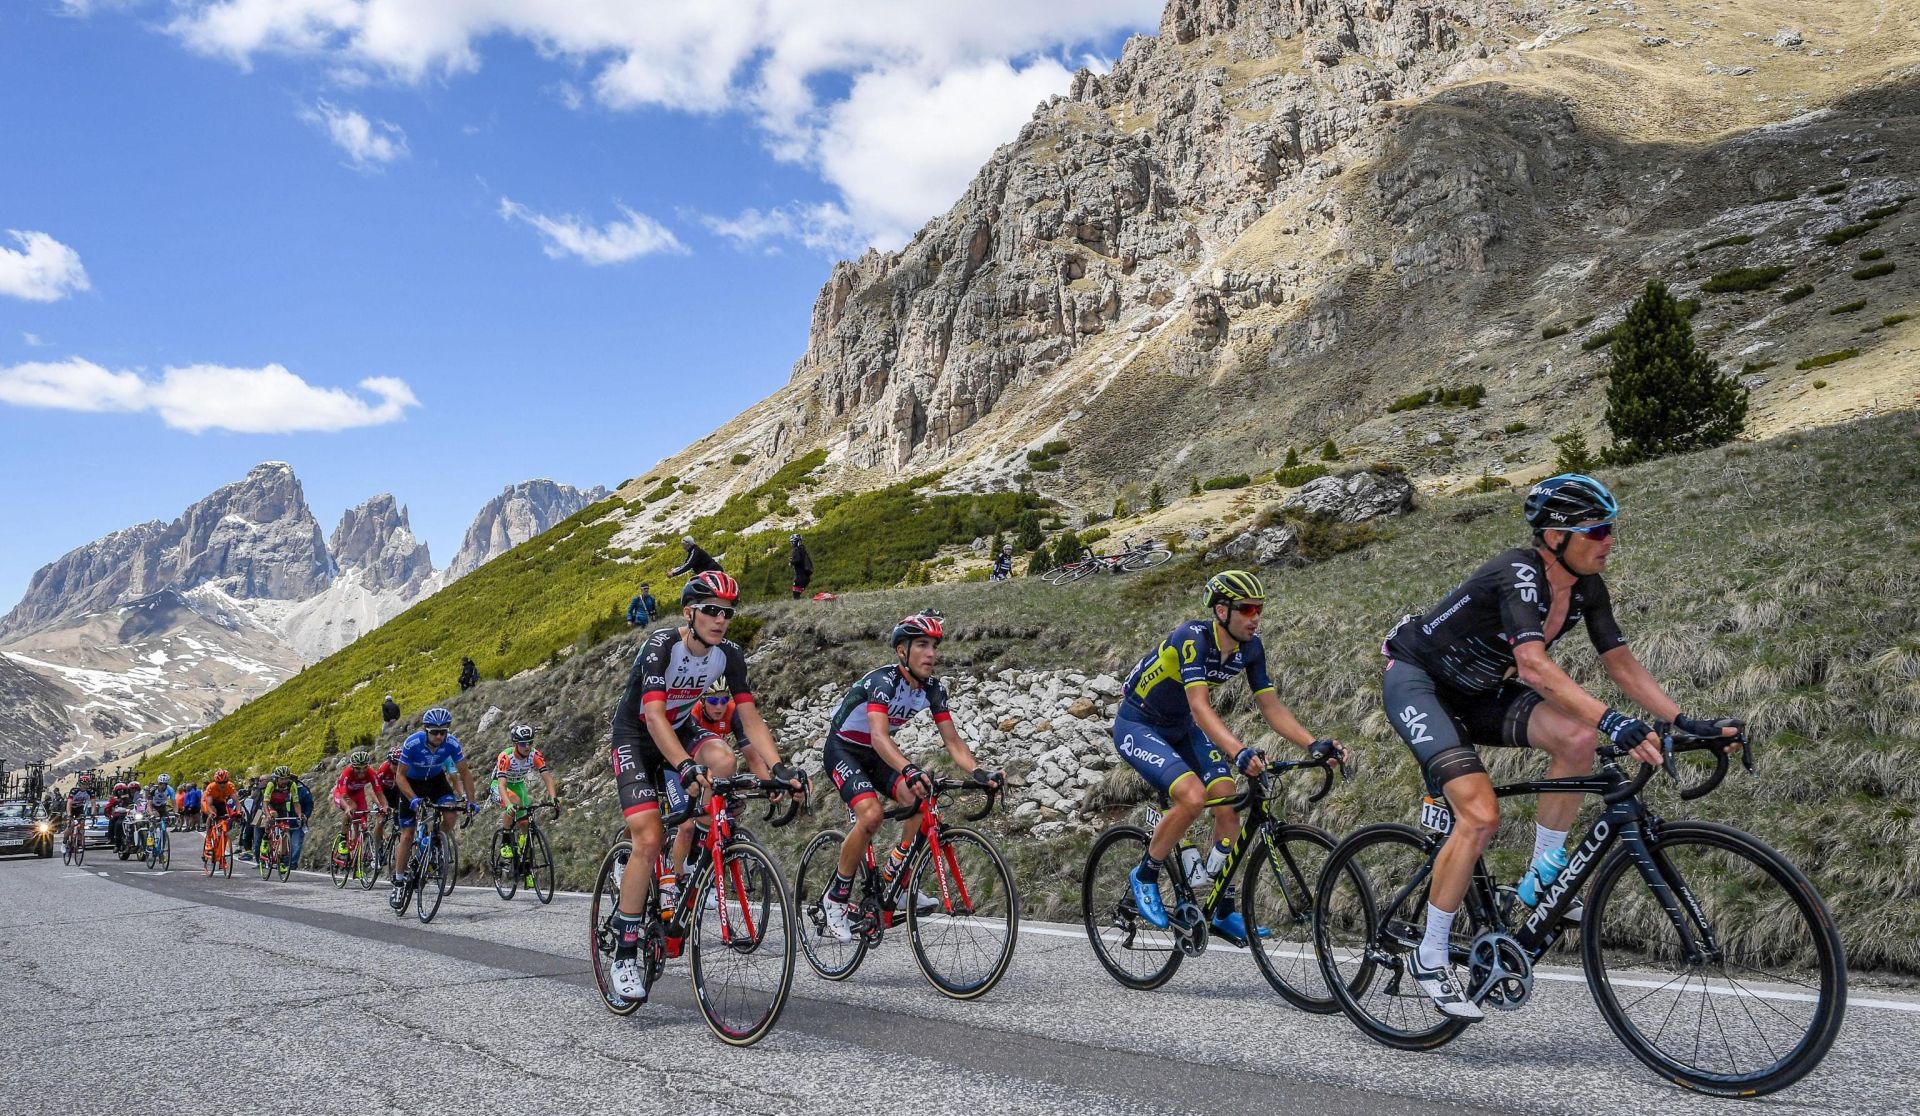 epa05989224 The peloton in action on the Pordoi pass during the 18th stage of the 100th Giro d'Italia cycling race,  over 137 km from Moena to Ortisei/St. Ulrich, Italy, 25 May 2017.  EPA/ALESSANDRO DI MEO